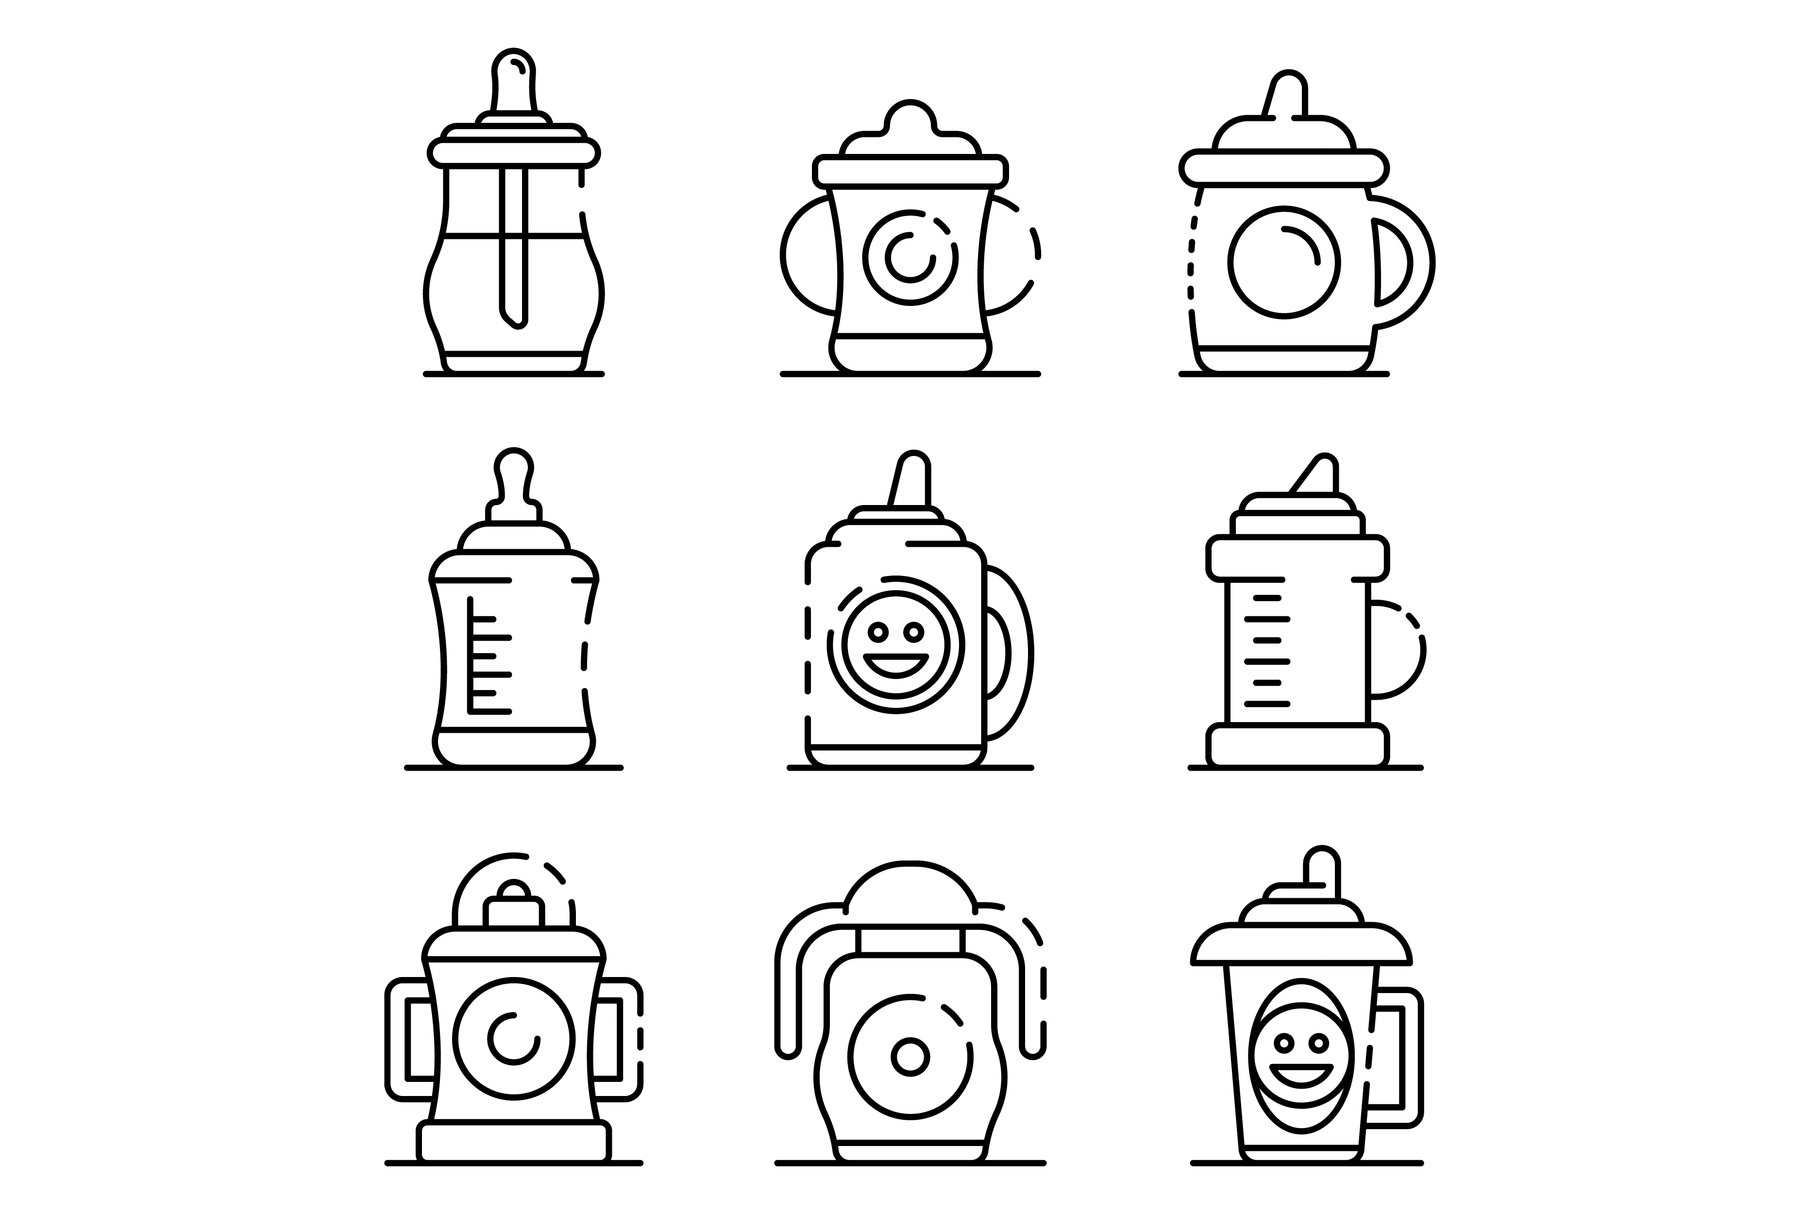 Sippy cup icons set, outline style cover image.